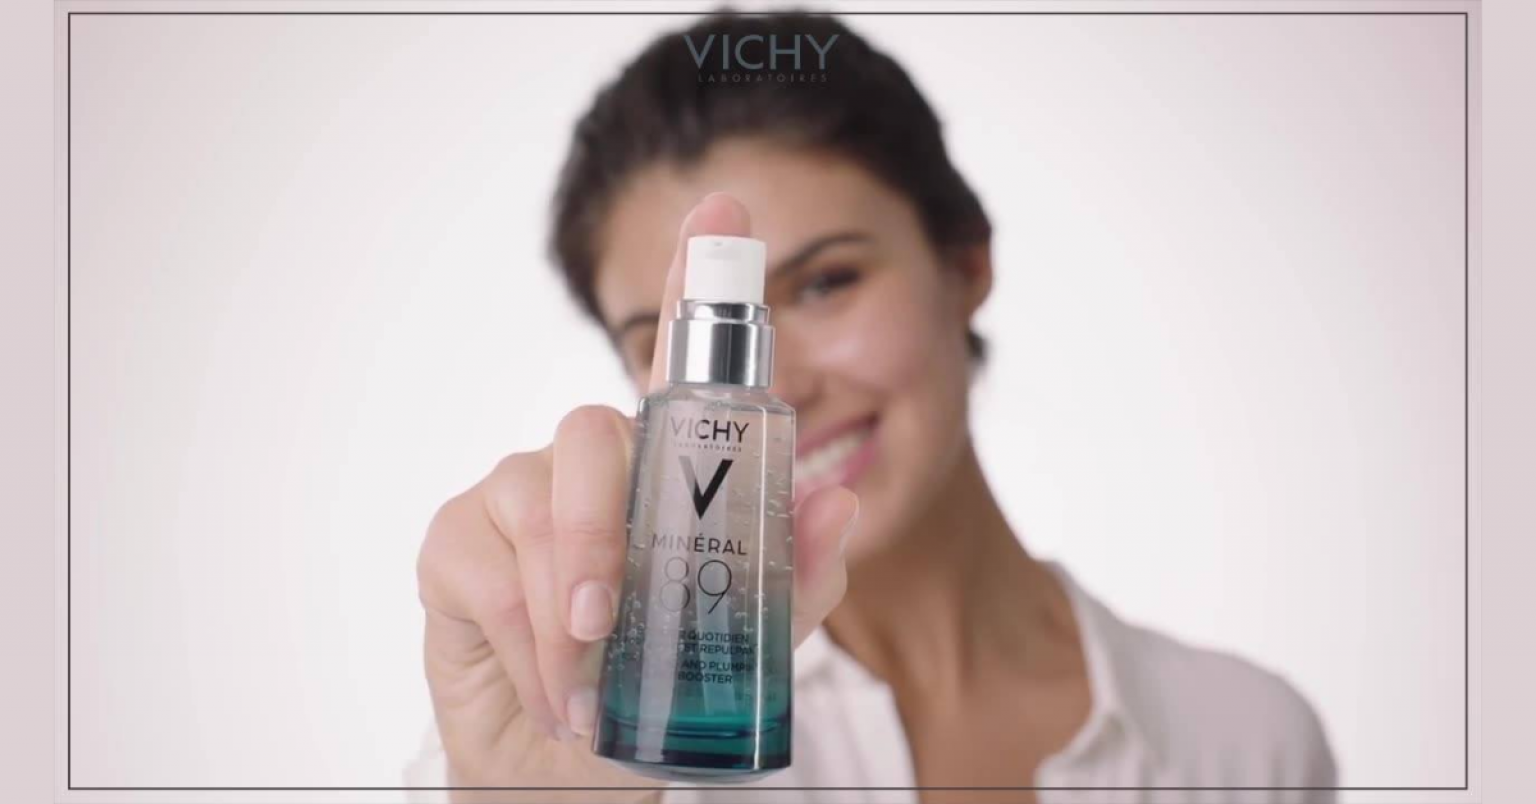 Receive Free Samples and review Vichy products for free ...